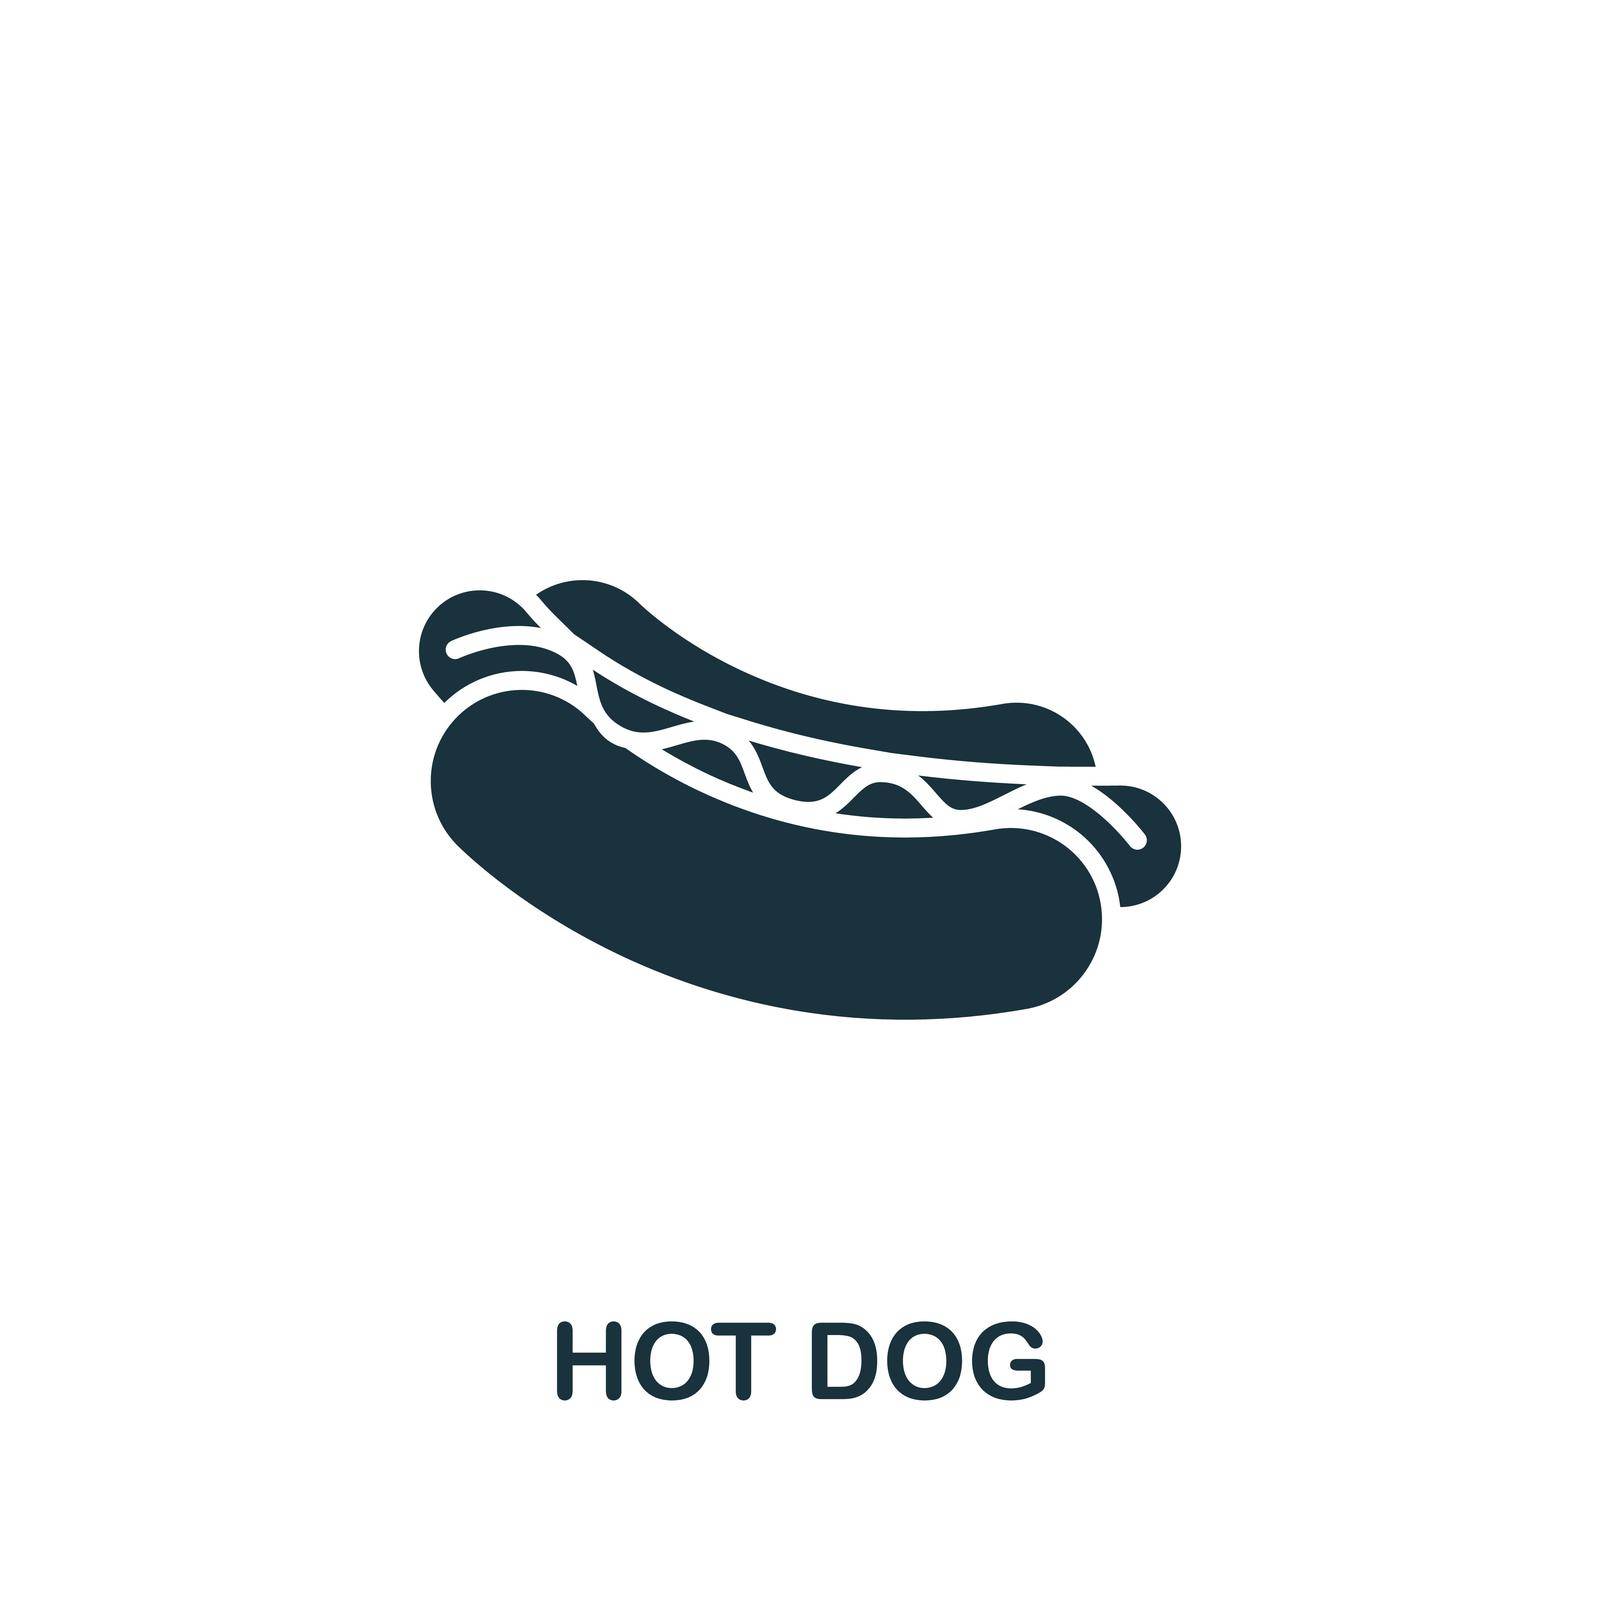 Hot Dog icon. Simple line element symbol for templates, web design and infographics.